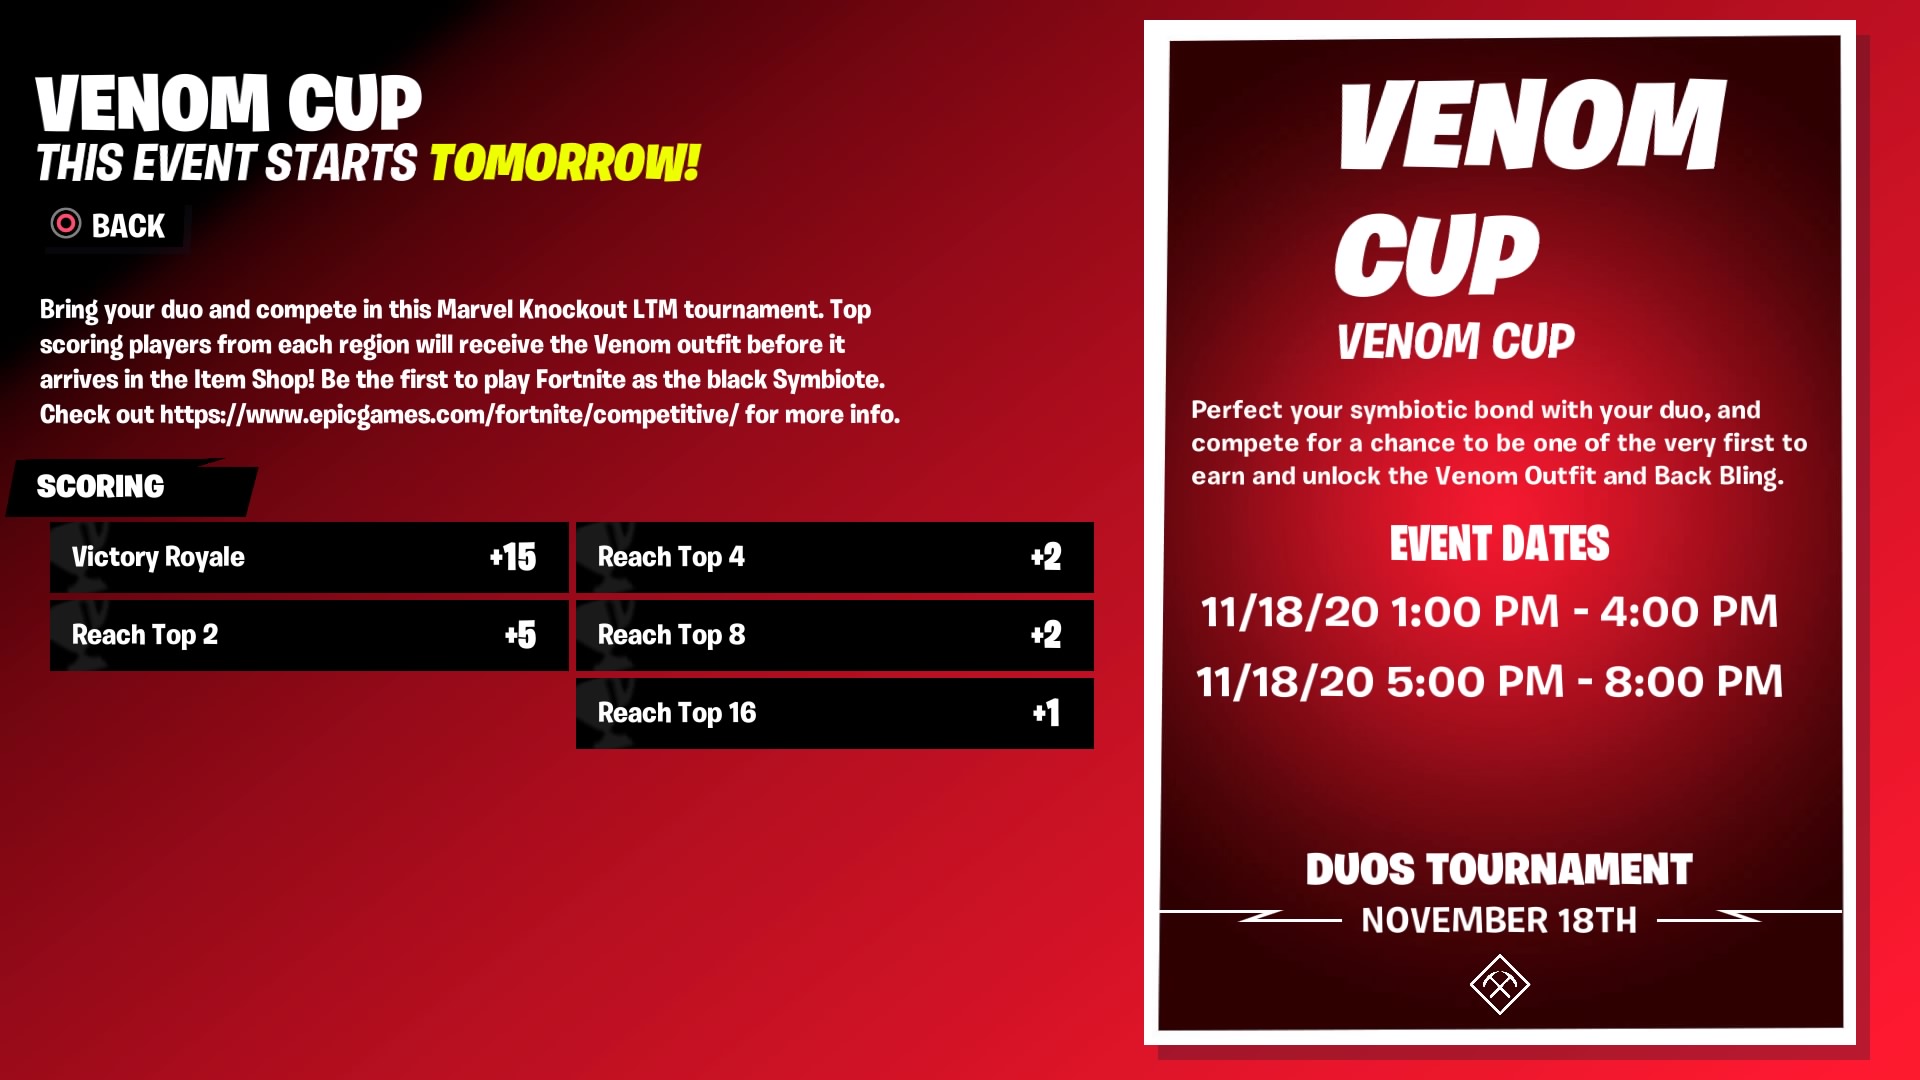 Fortnite Venom Cup Start Time And How To Get The Venom Skin Early